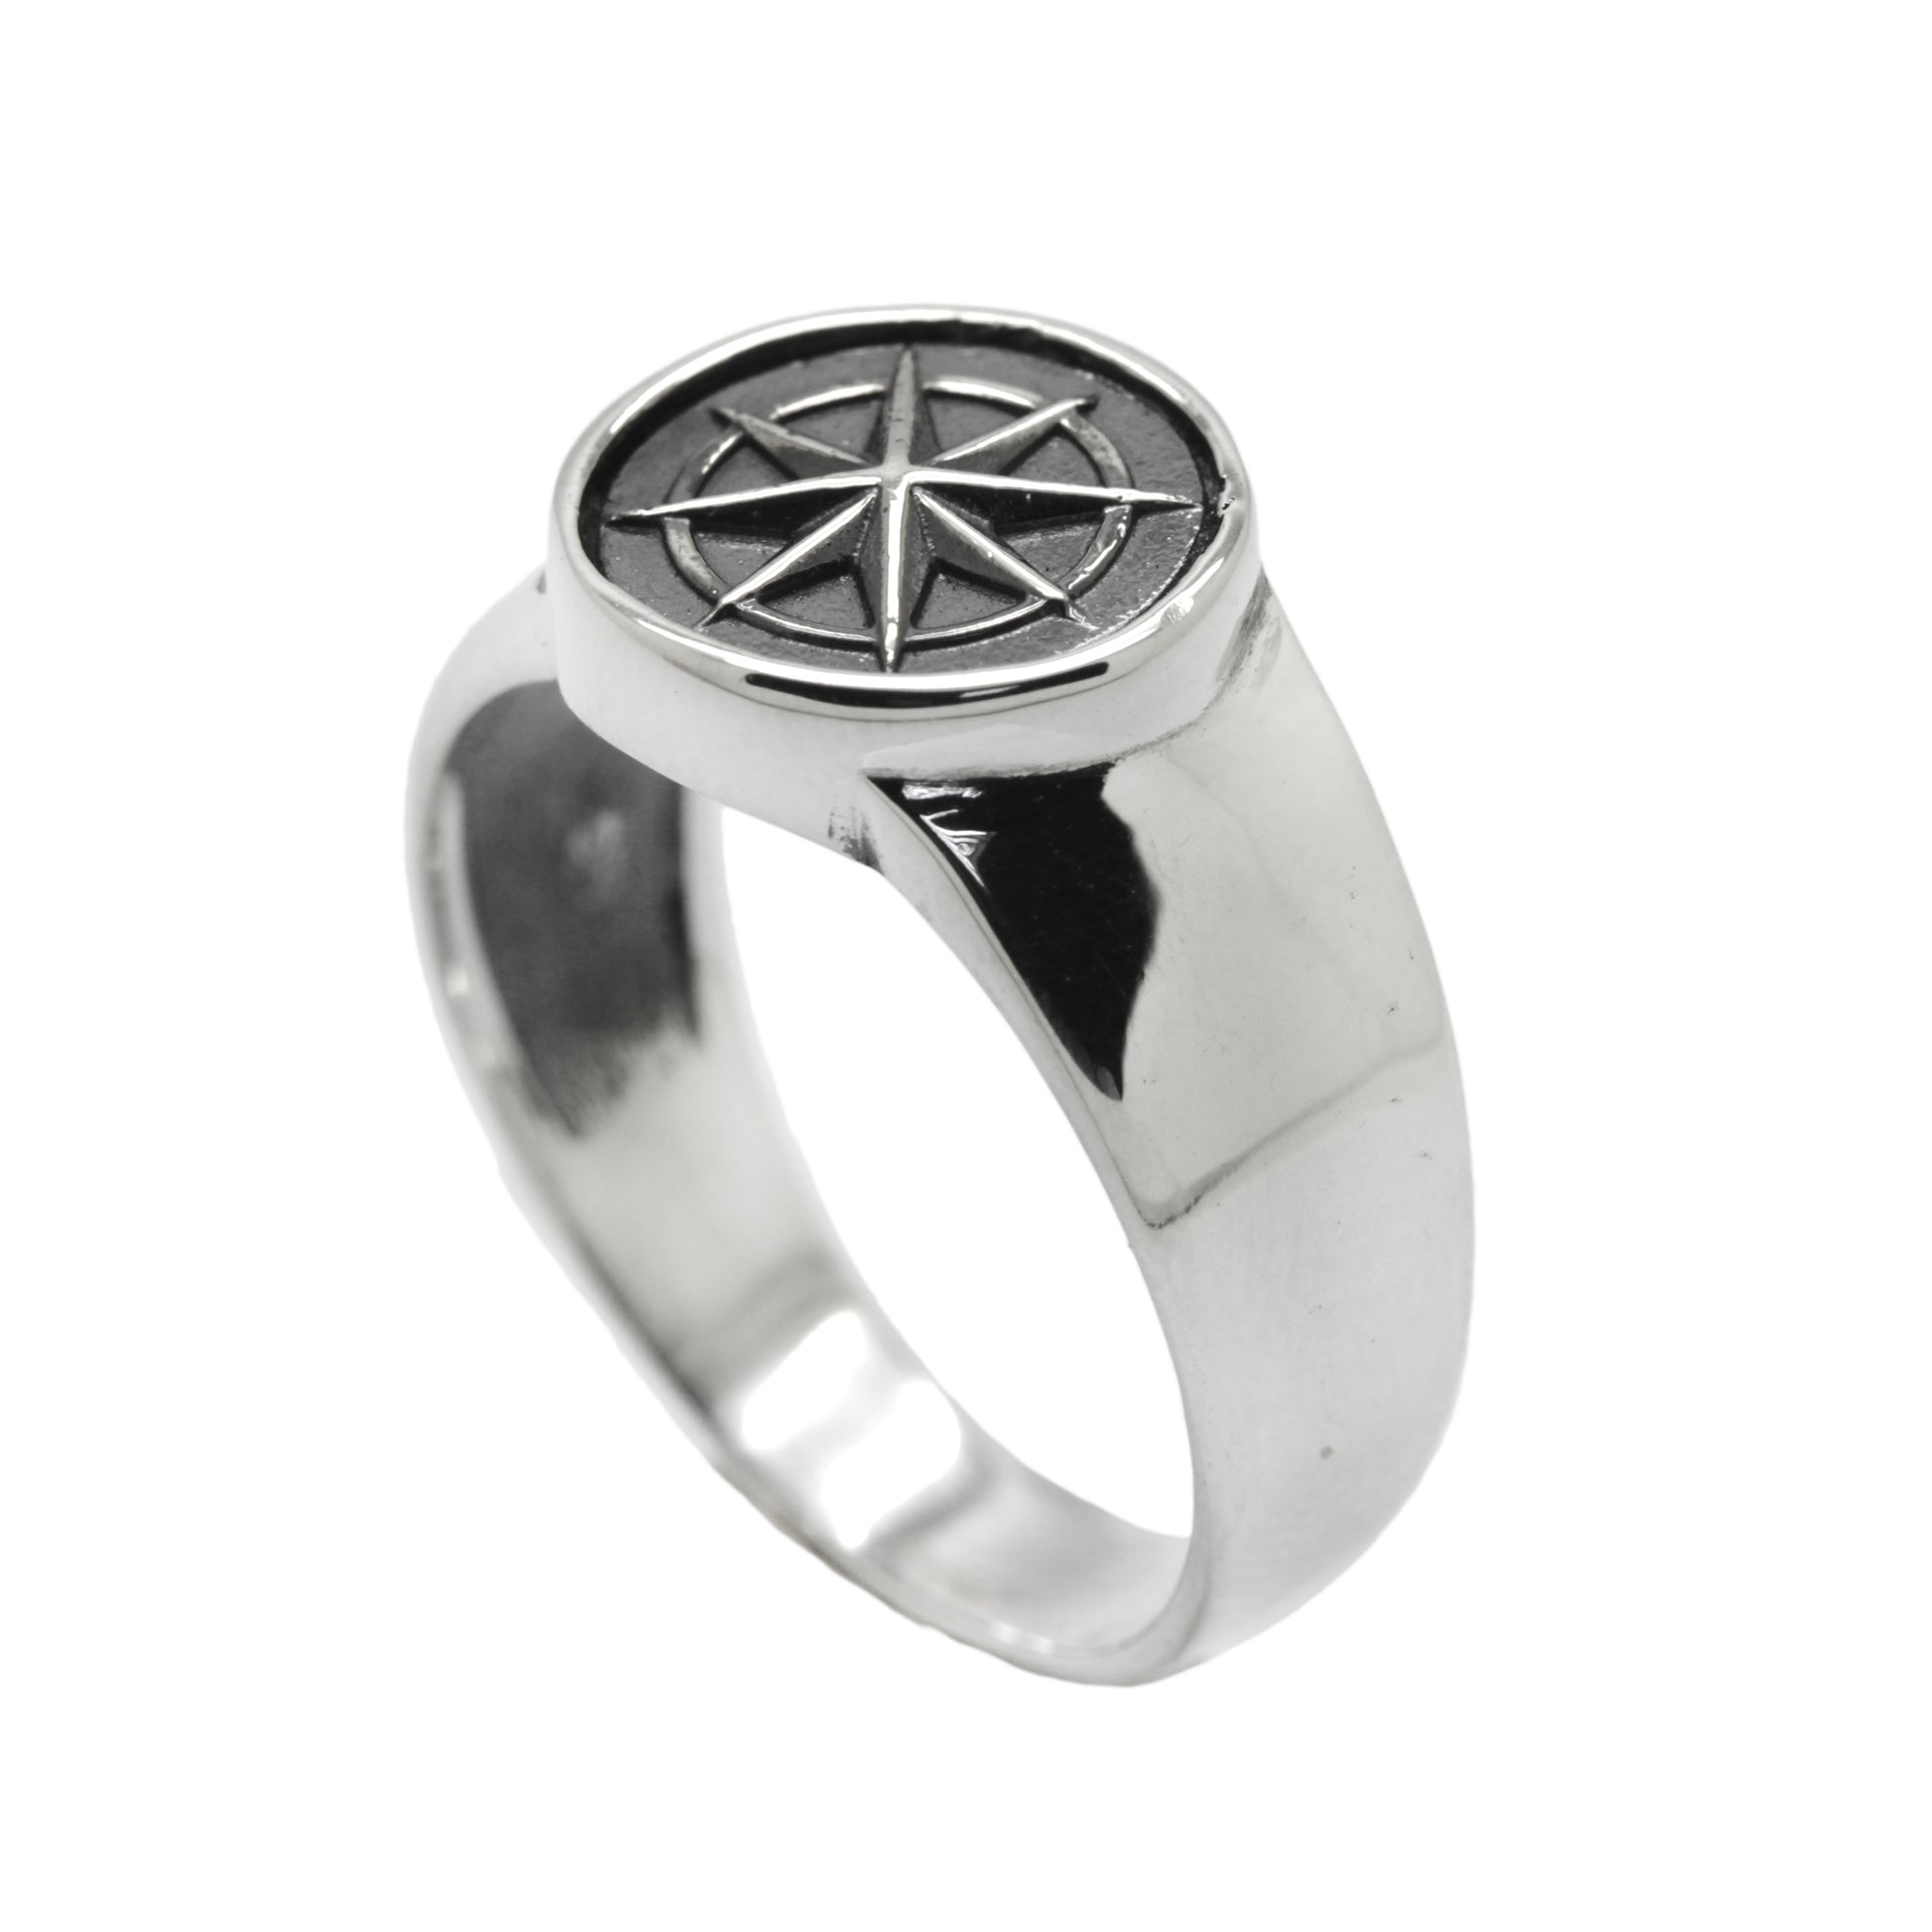 Windrose Ring Sea Compass Light Pinky Round Top Sterling Silver Signet